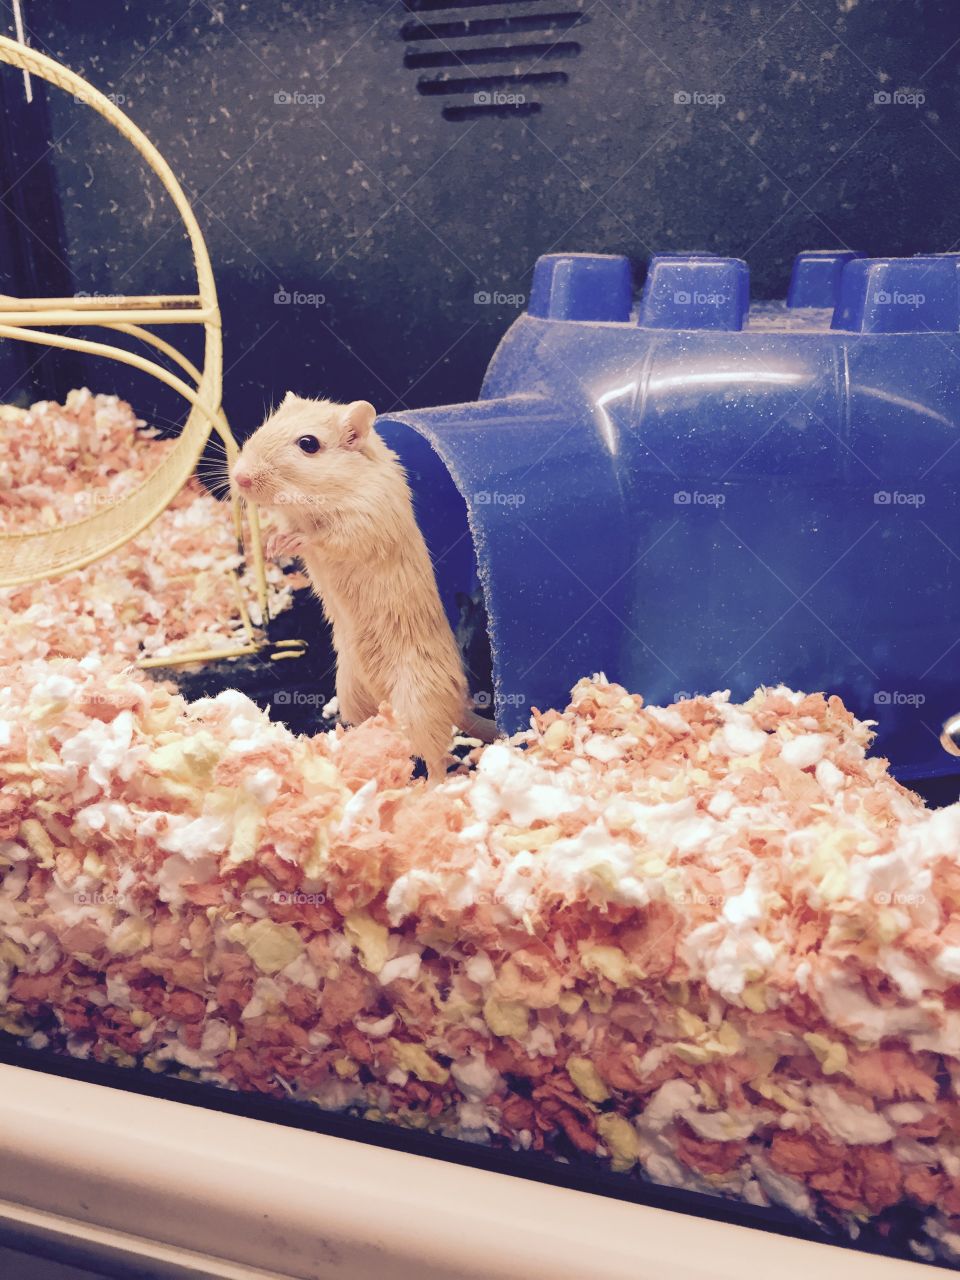 A curious hamster taking a peek at me. 